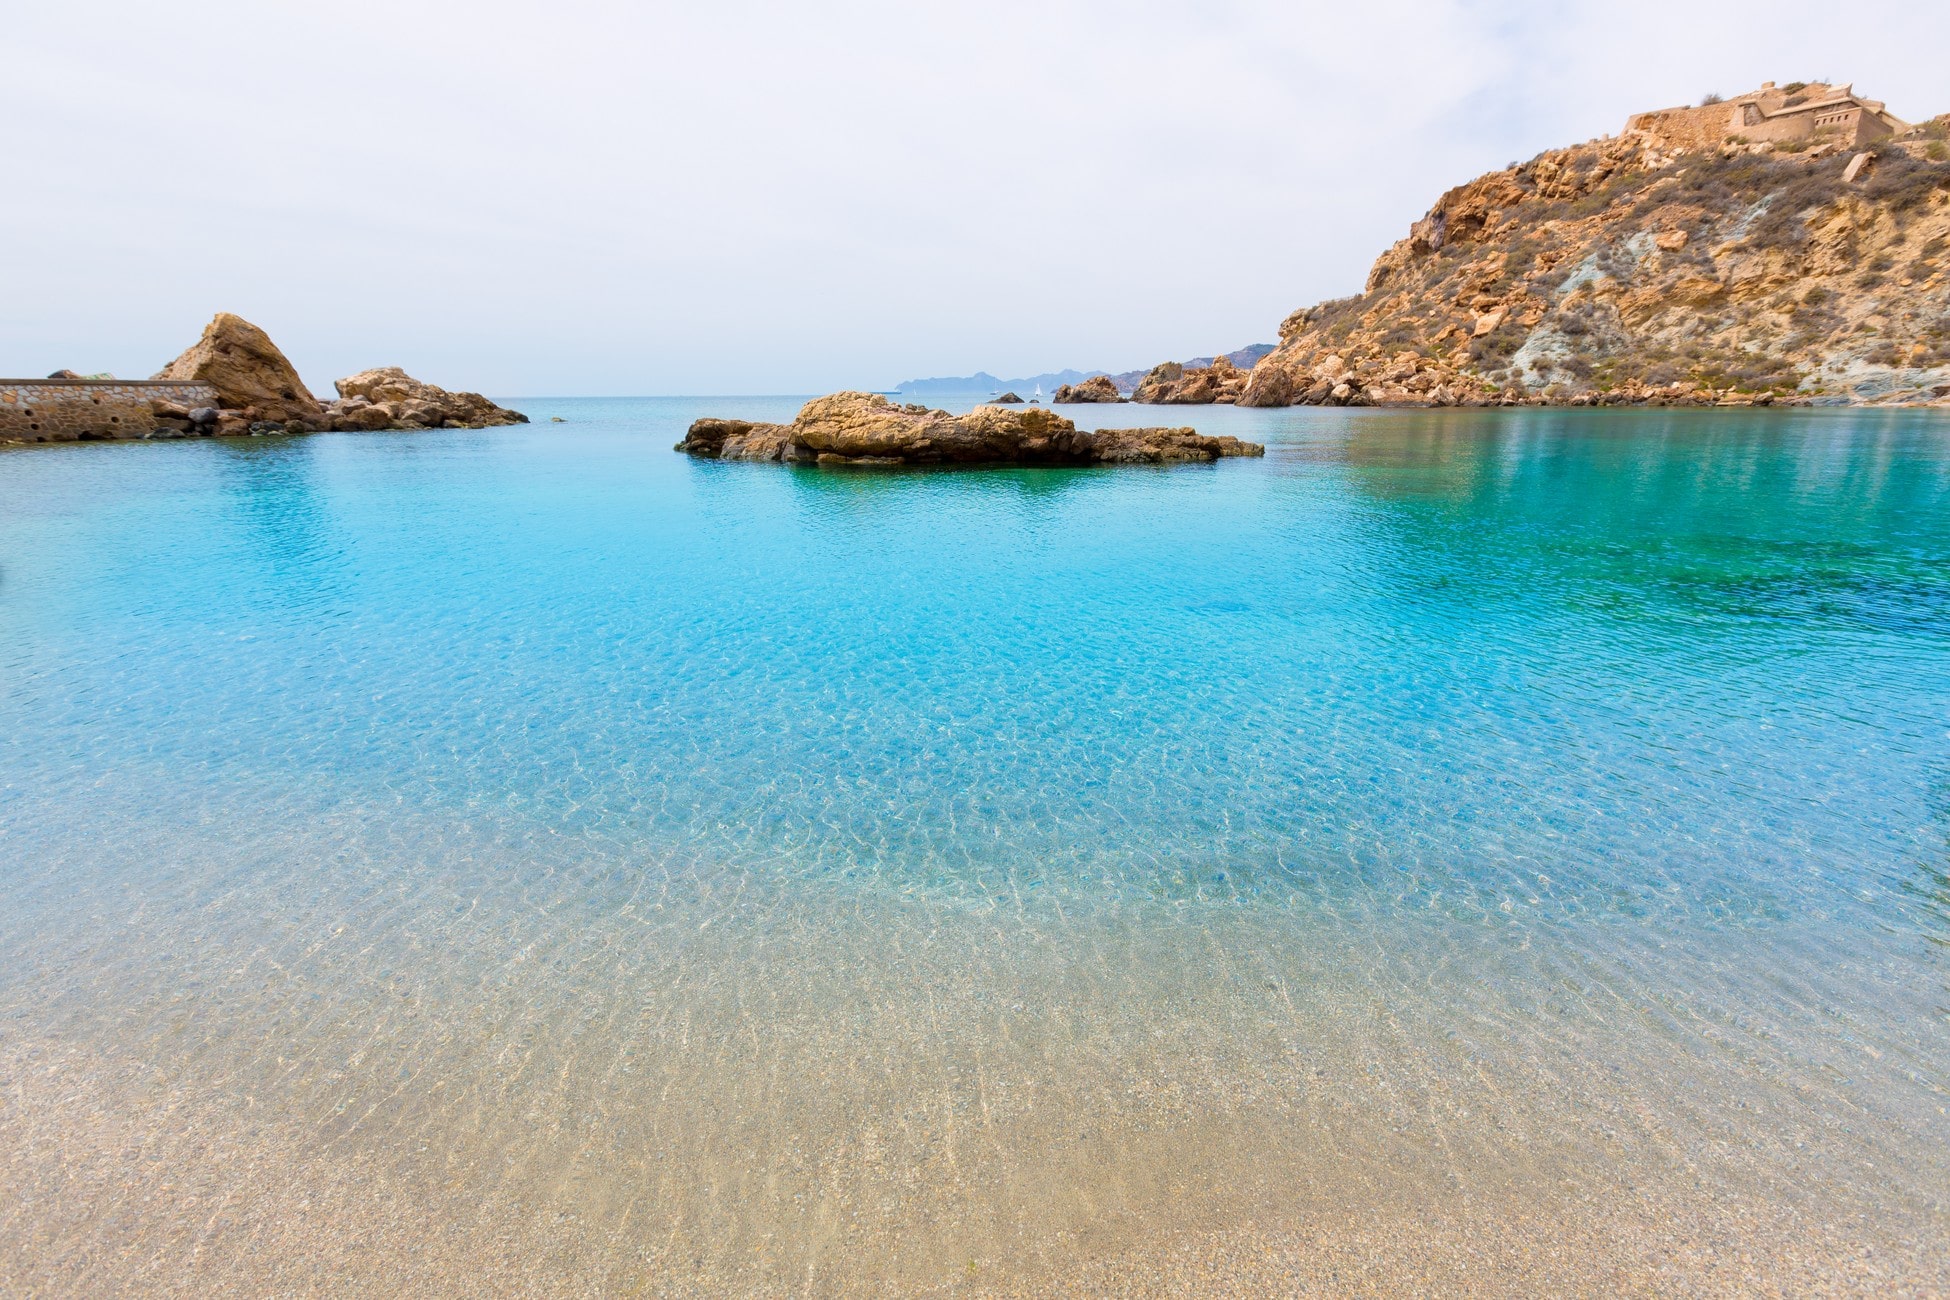 Retreat to the region of Murcia and extend your summer